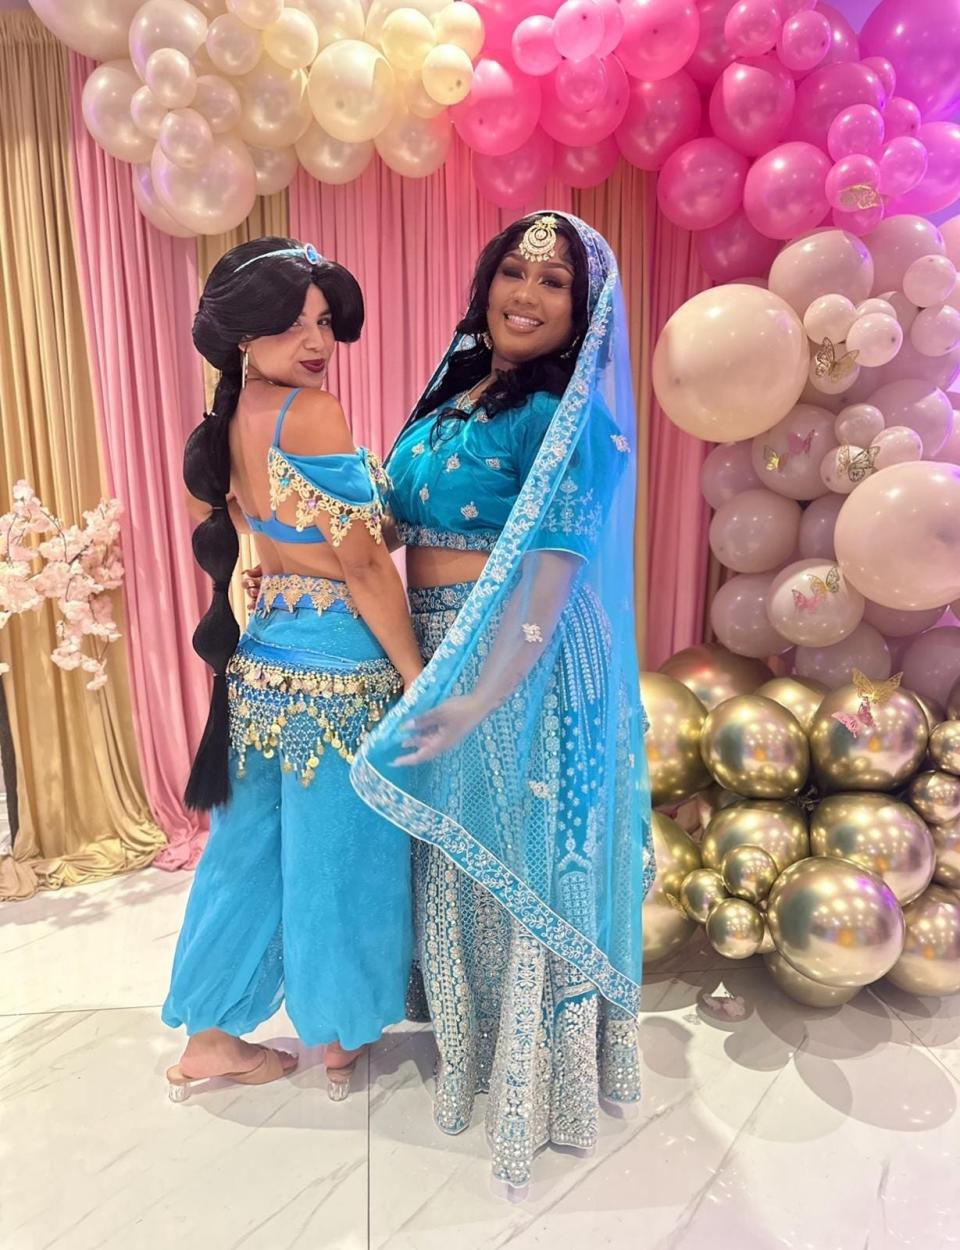 D'Yani Bivens wore traditional clothing to show Princess Jasmine's authentic culture.